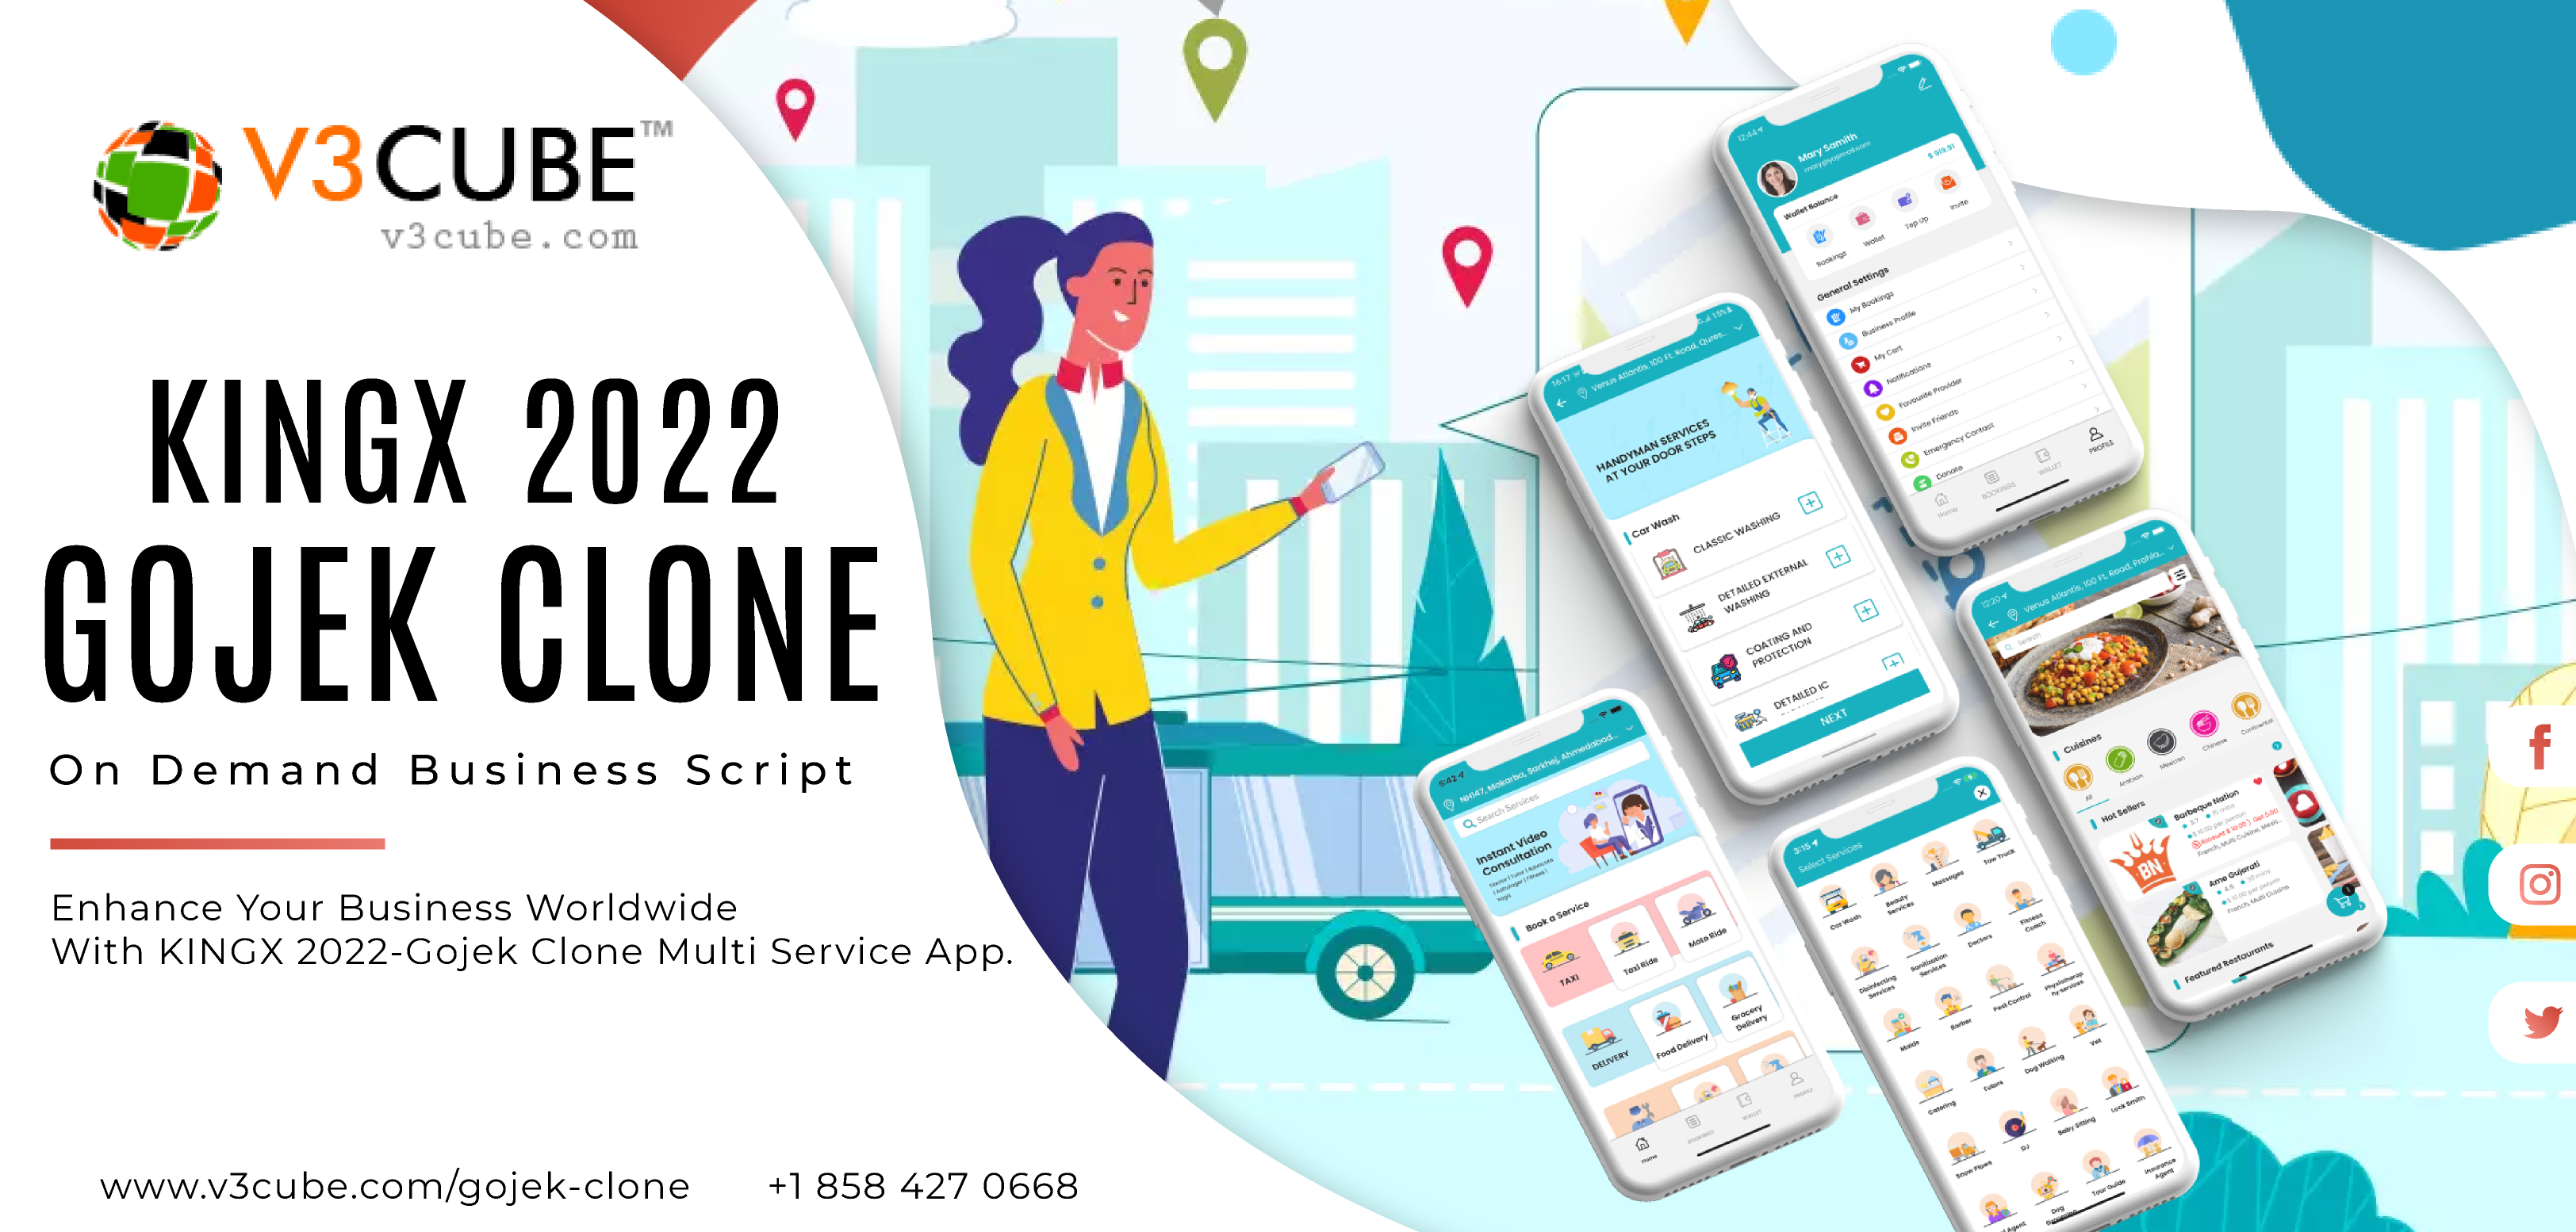 Why Gojek Clone KingX 2022 Is Better Option For Your Multi-services Business in Indonesia